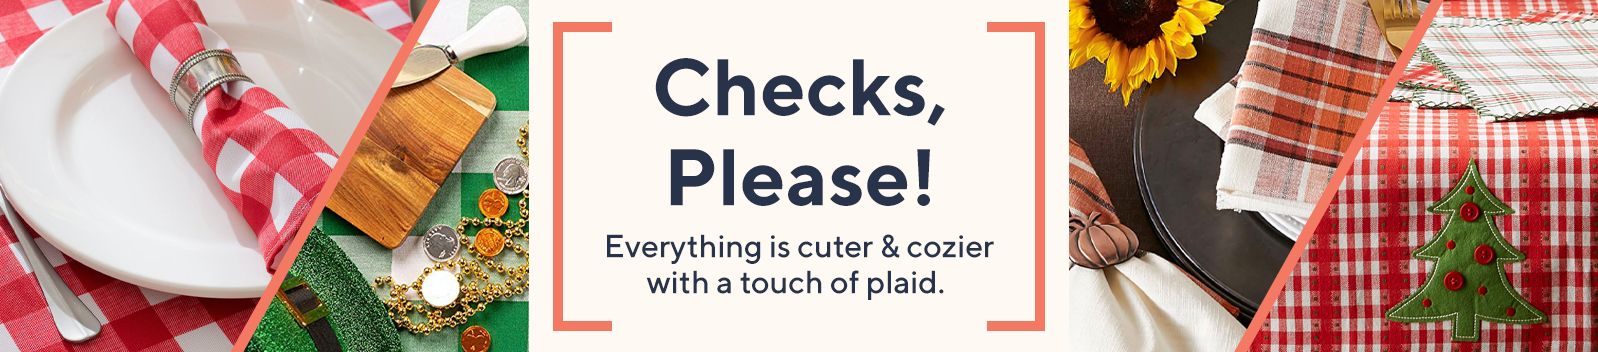 Checks, Please!  Everything is cuter & cozier with a touch of plaid. 